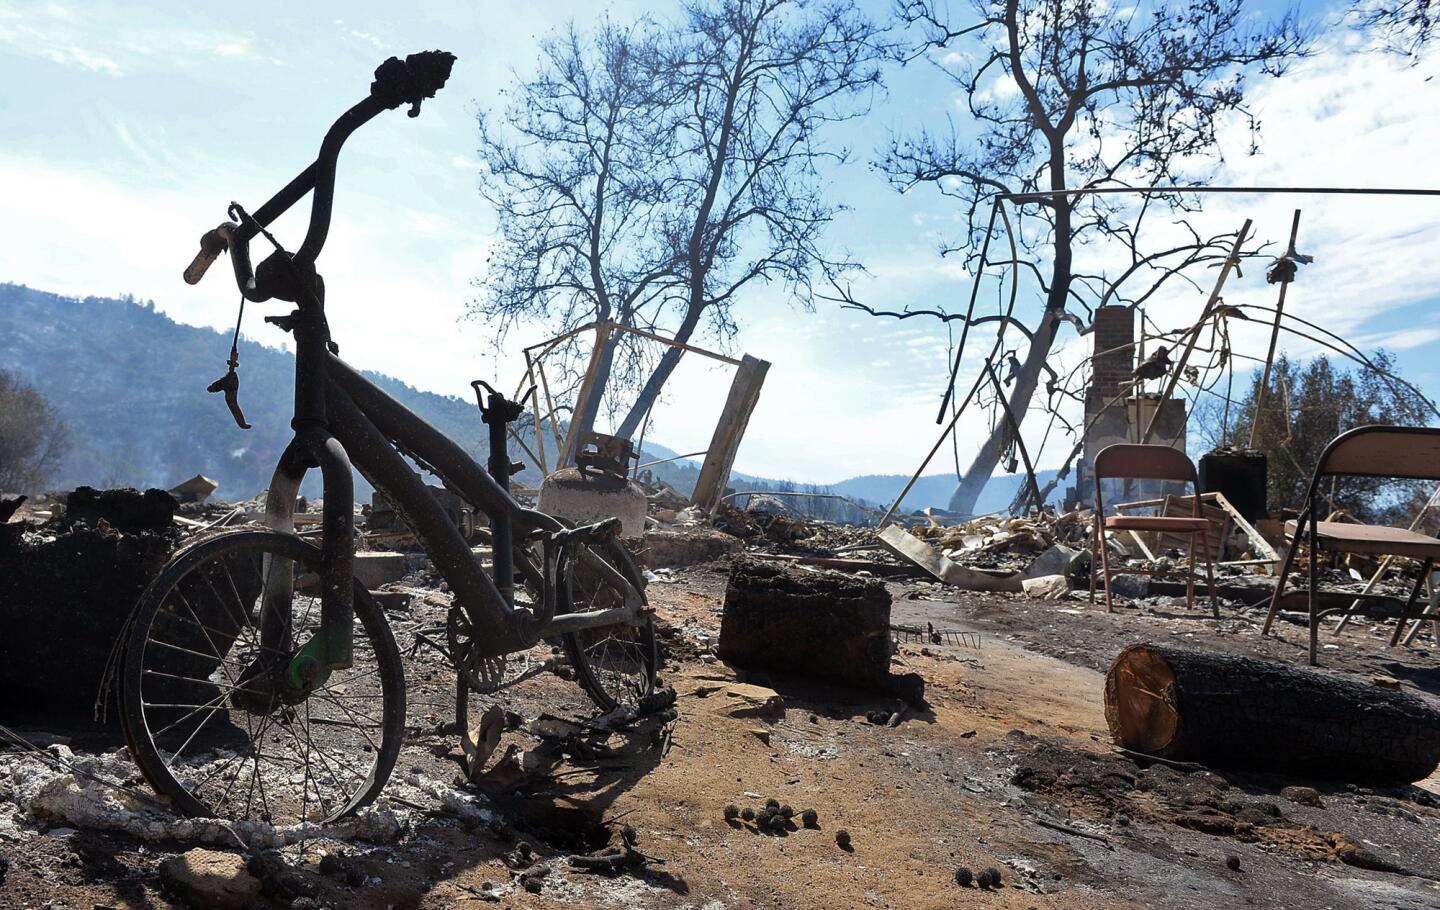 A child's bike sits among the ruins of a burned home destroyed in a wildfire along Highway 41 outside Oakhurst, Calif.